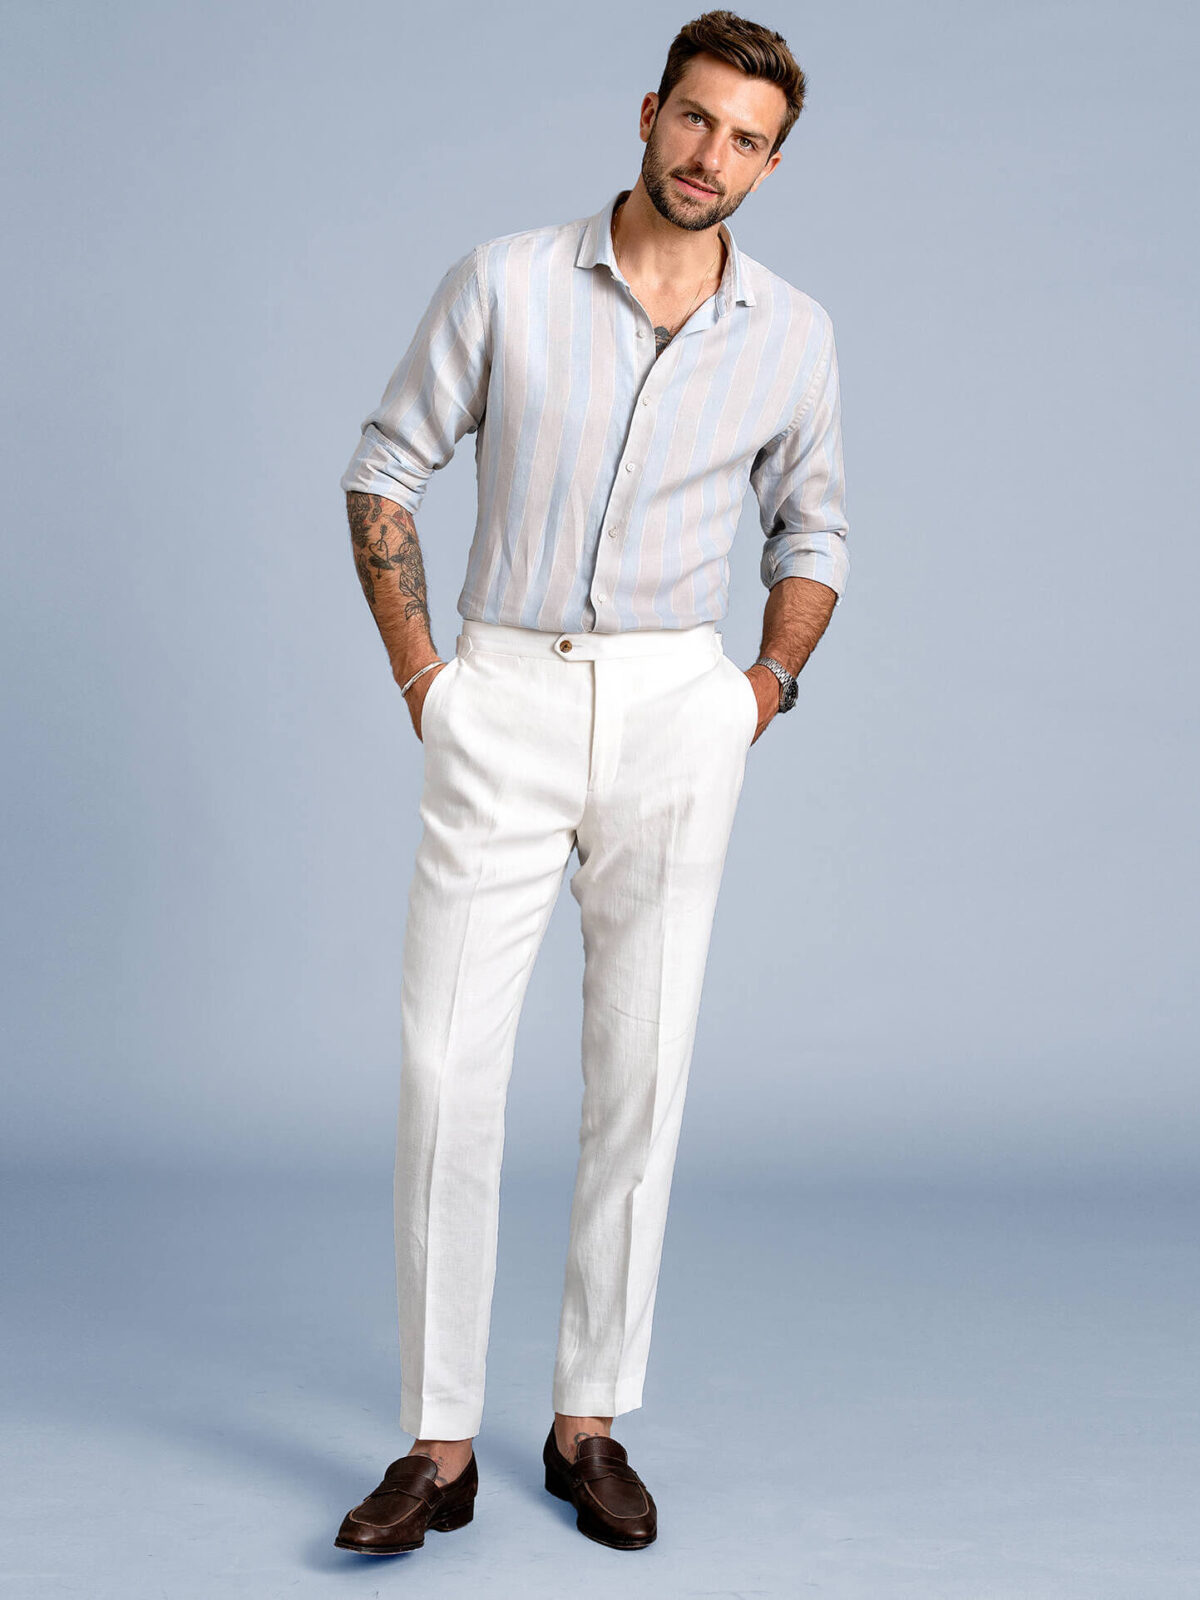 White linen outfit, White linen pants outfit, White outfit for men